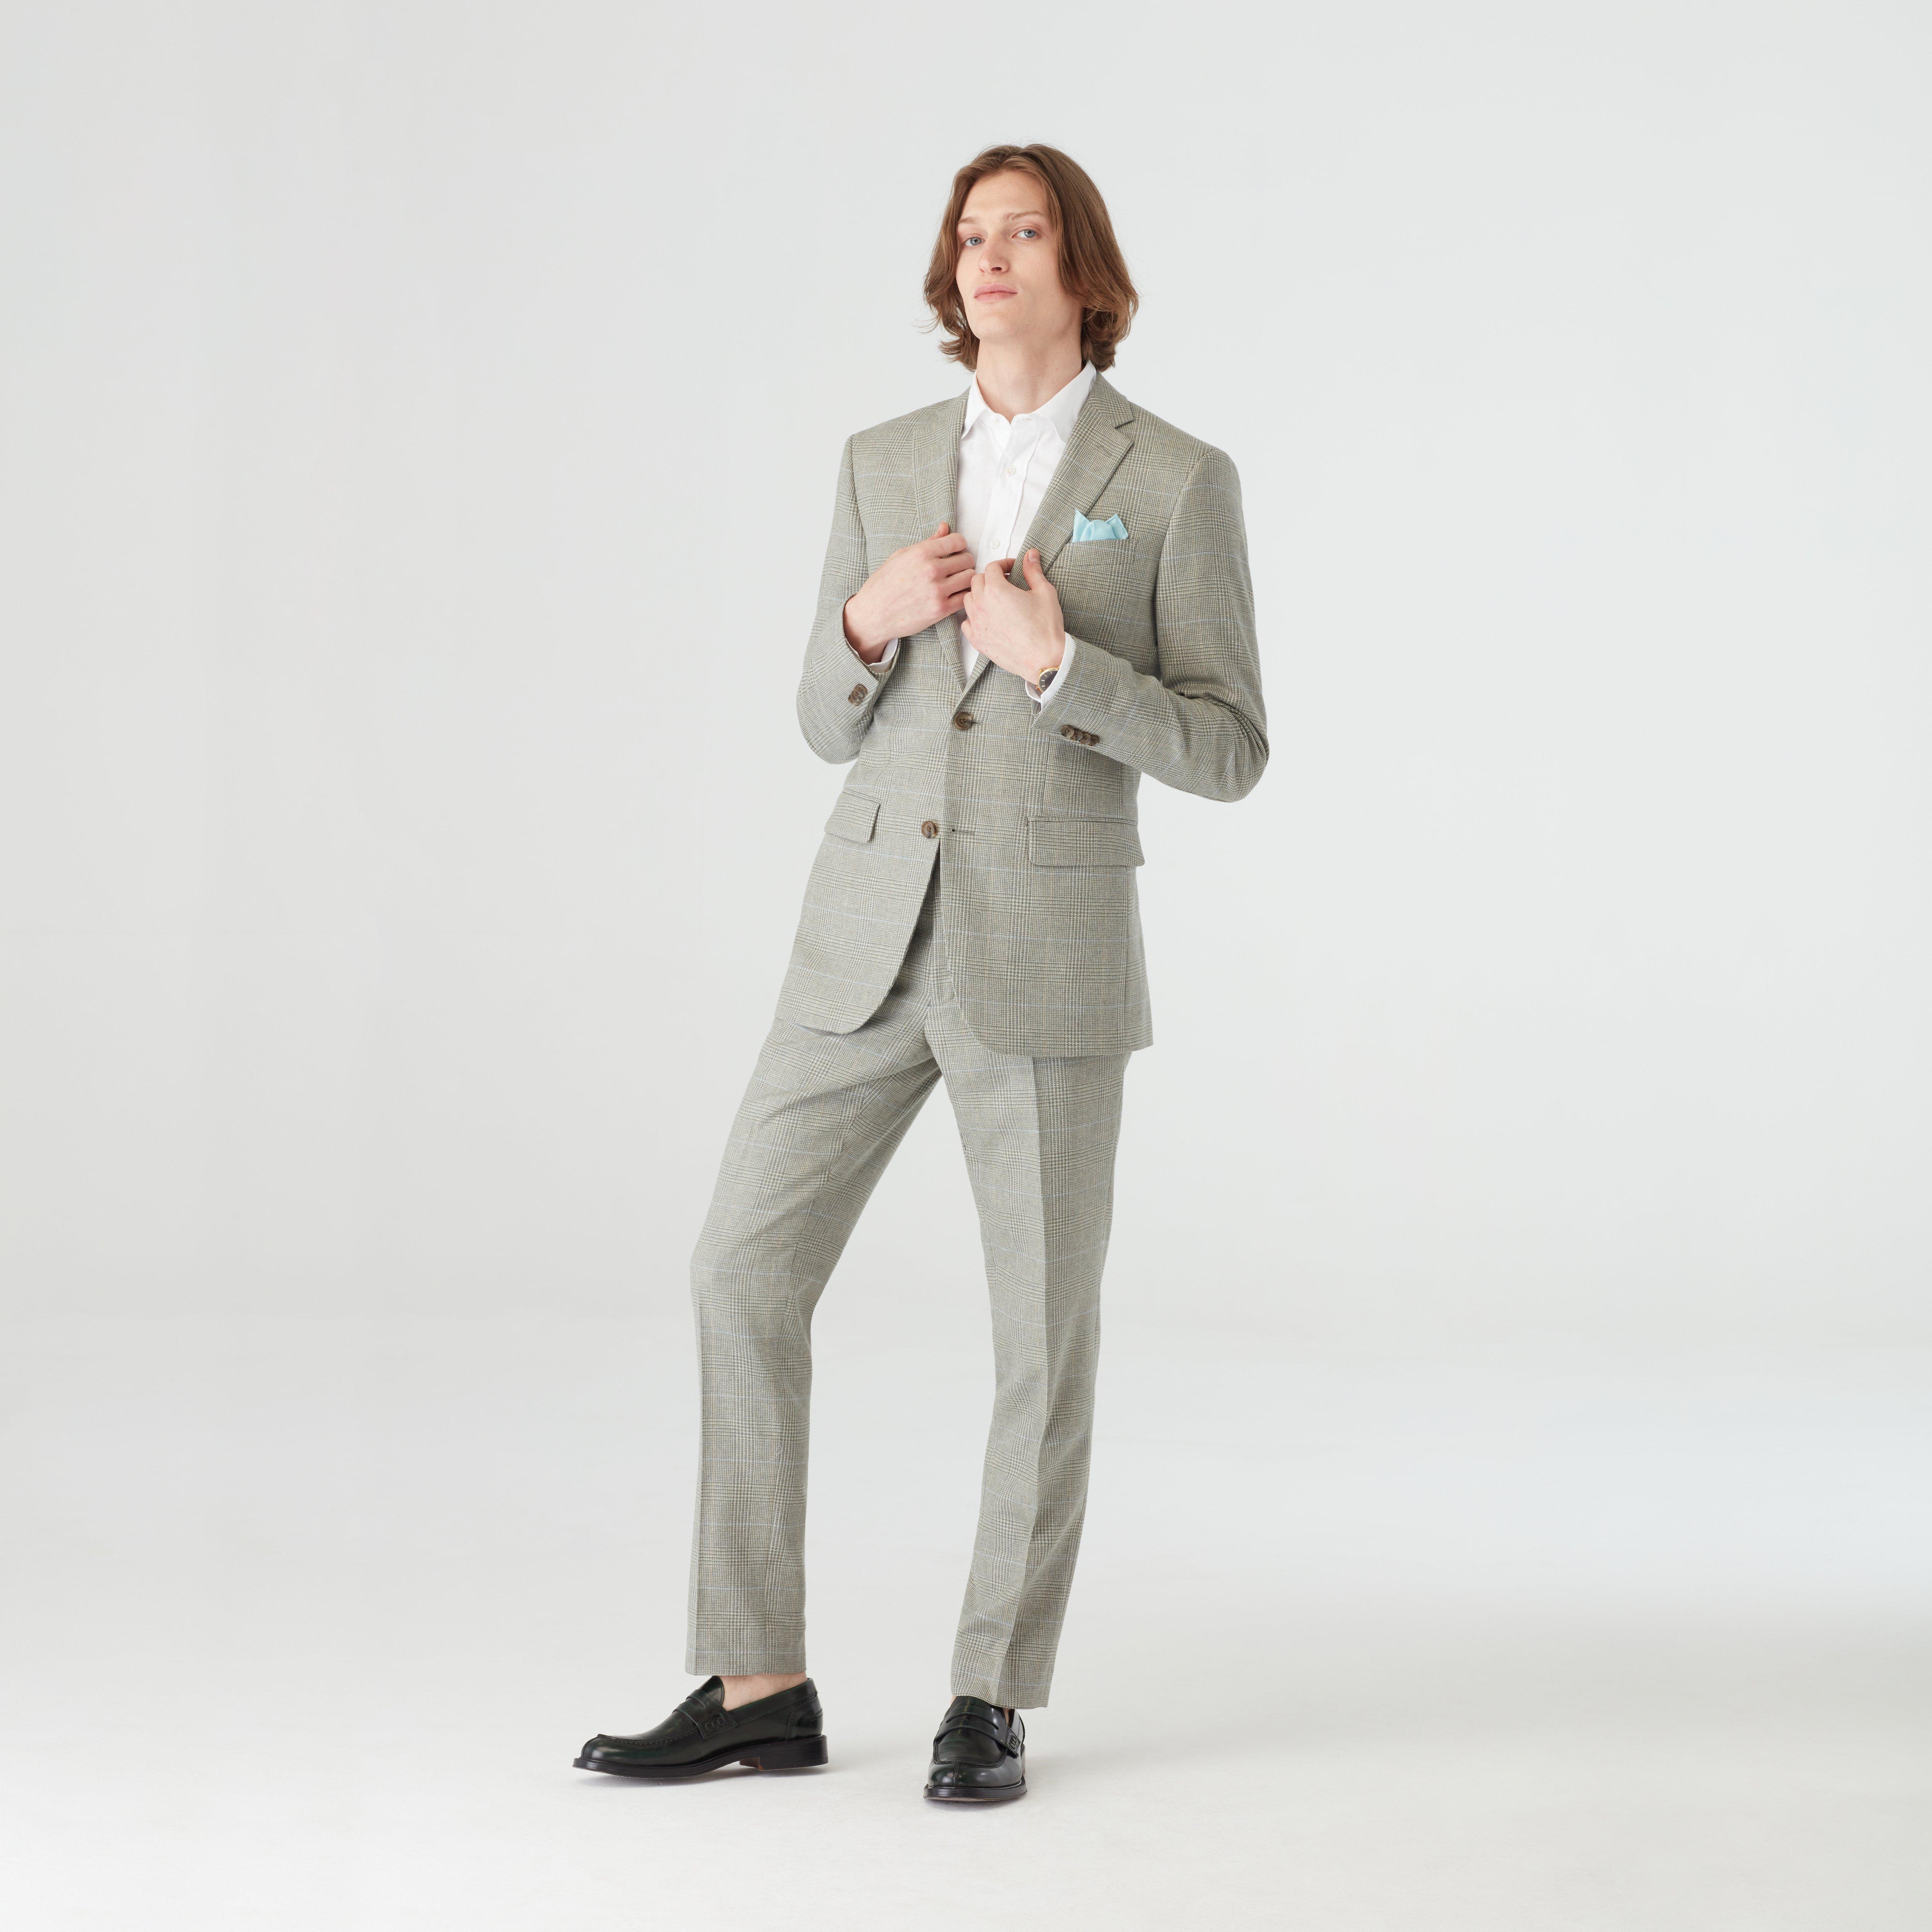 Custom Suits Made For You - Brighton Prince of Wales Sage Suit | INDOCHINO